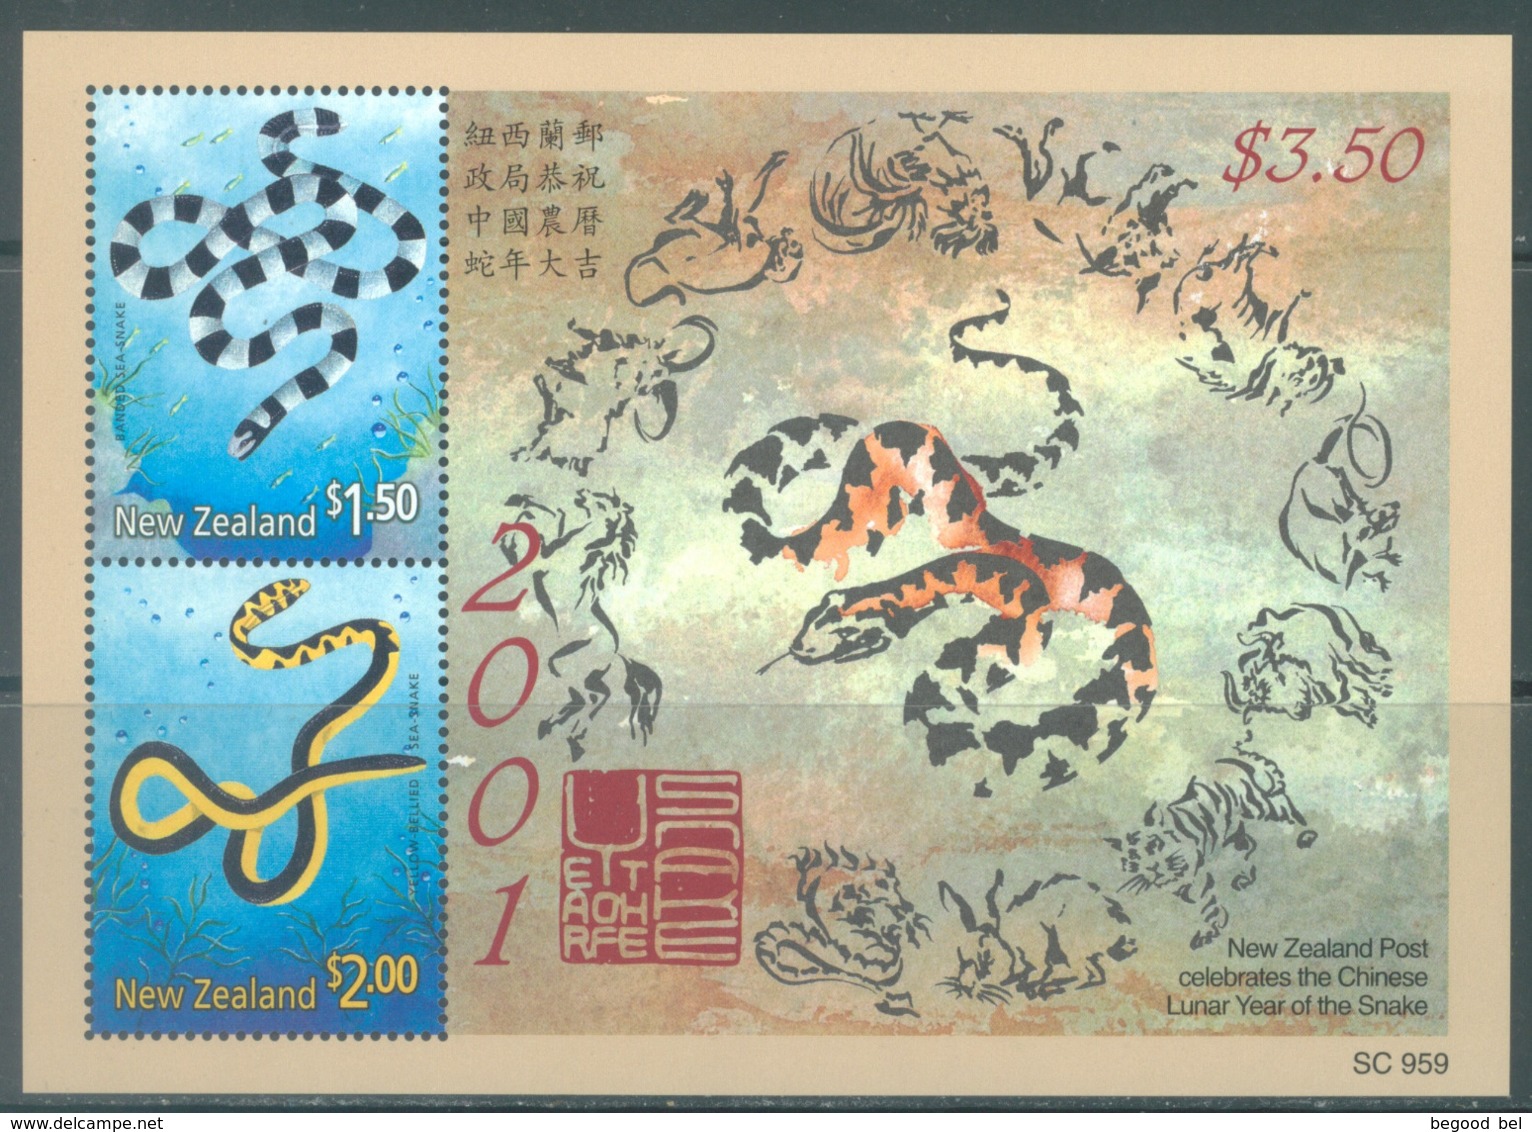 NEW ZEALAND - MNH/** - 2001 - CHINESE LUNAR YEAR OF THE SNAKE  - Yv 144 -  Lot 20657 - Blocs-feuillets